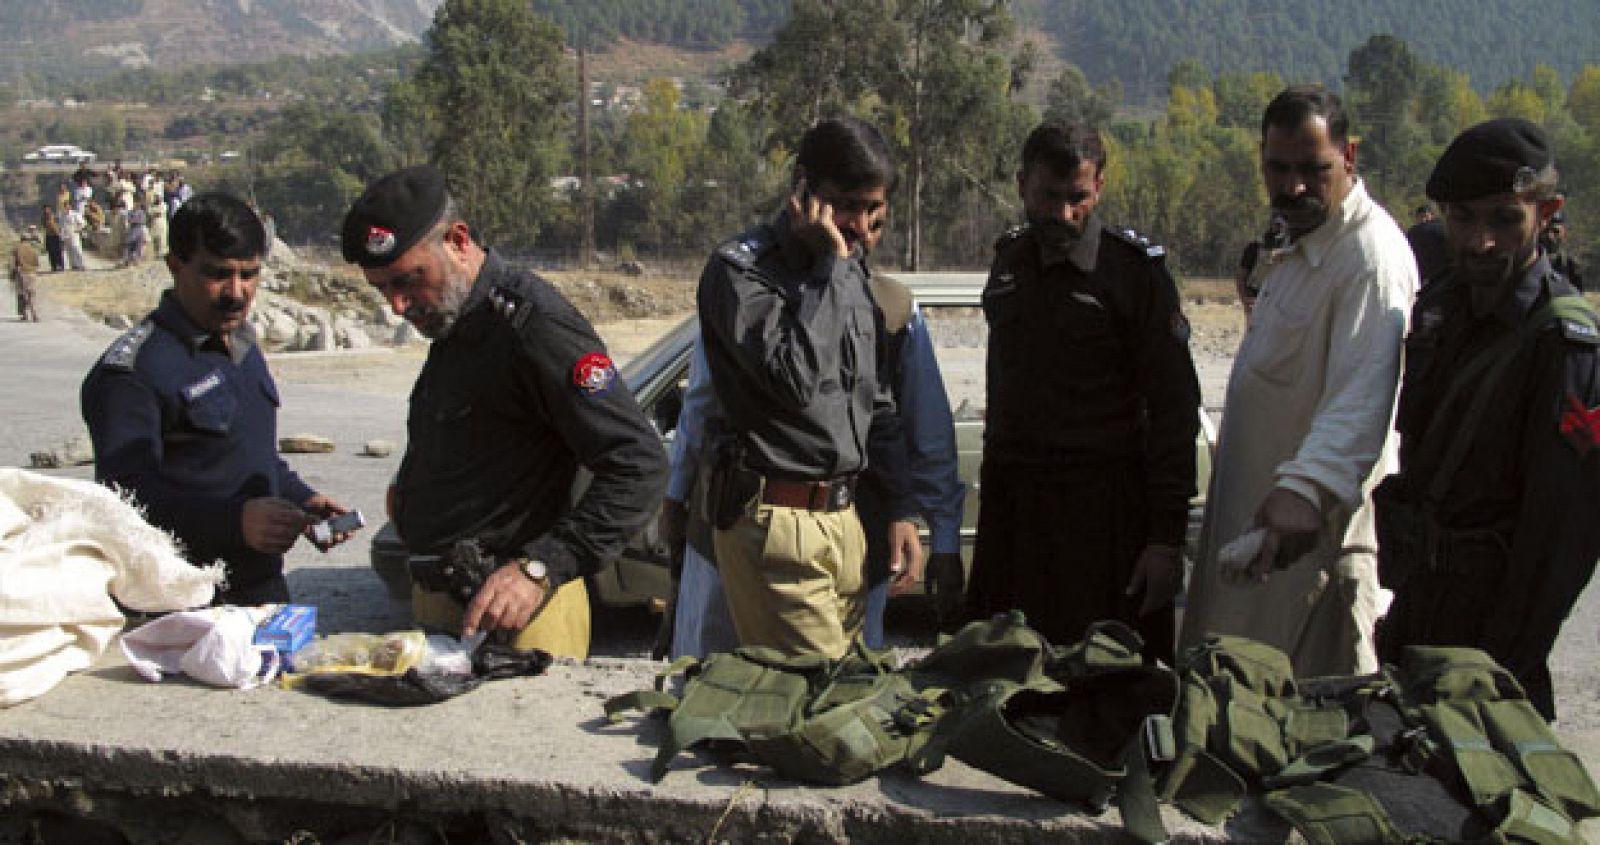 Pakistani police inspect the suicide jackets recovered from a car after a shootout in Mansehra